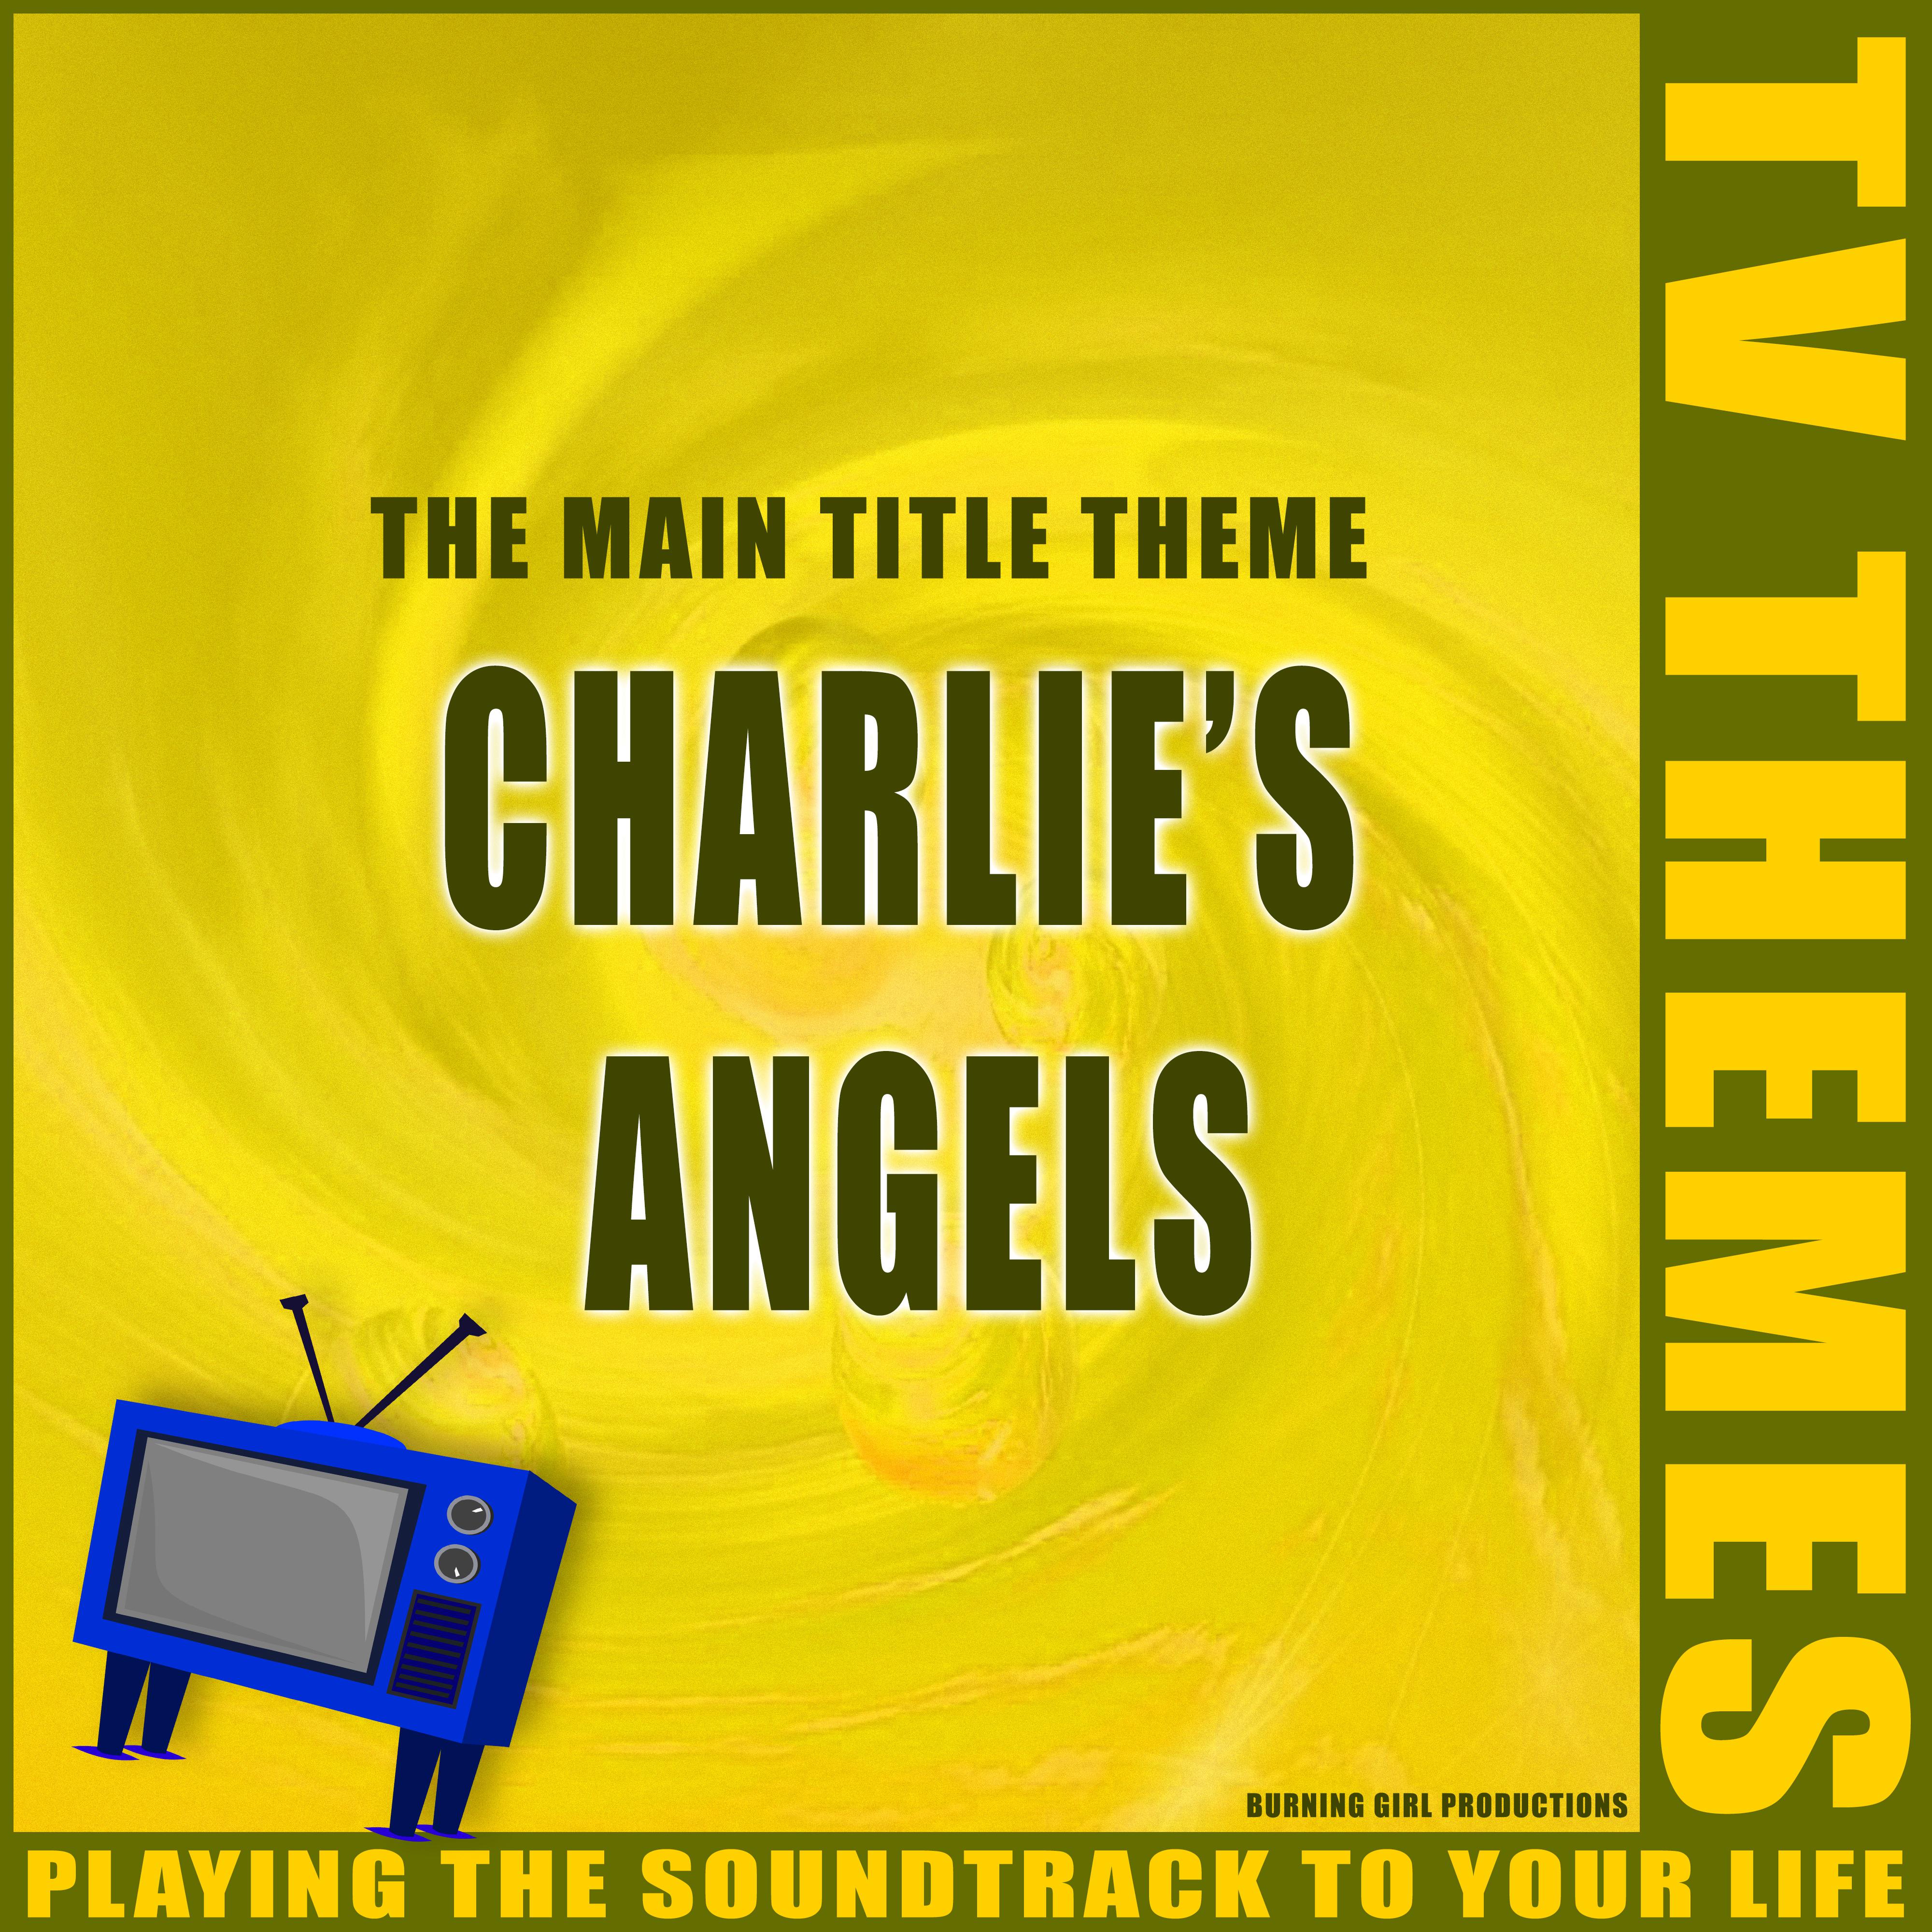 The Main Title Theme - Charlie's Angels